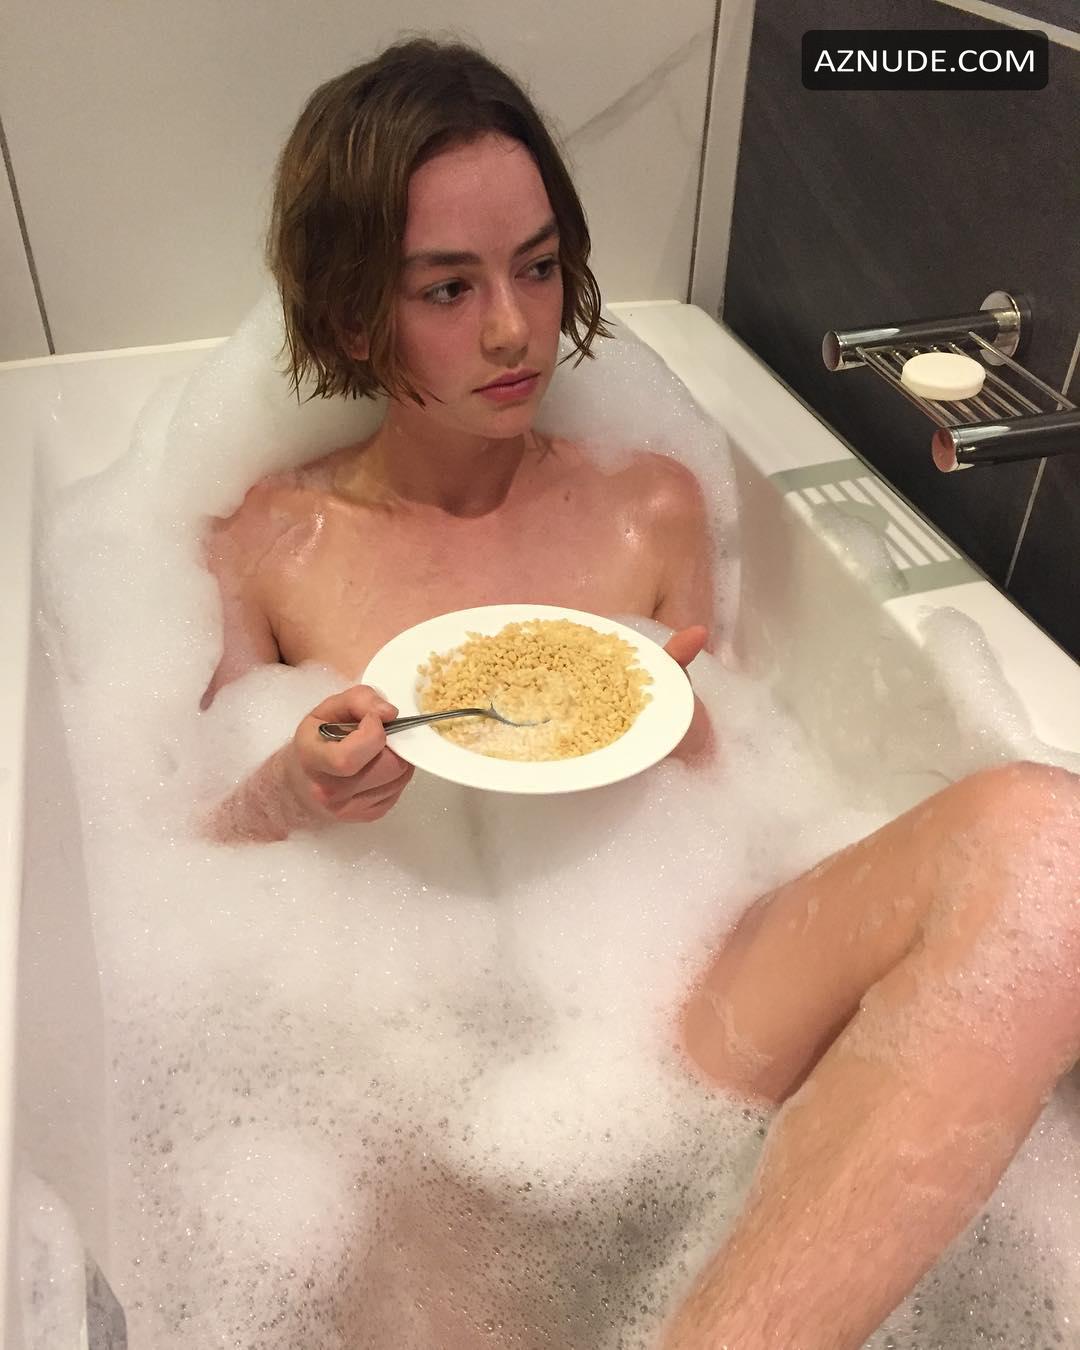 donald akers share brigette lundy paine nude photos